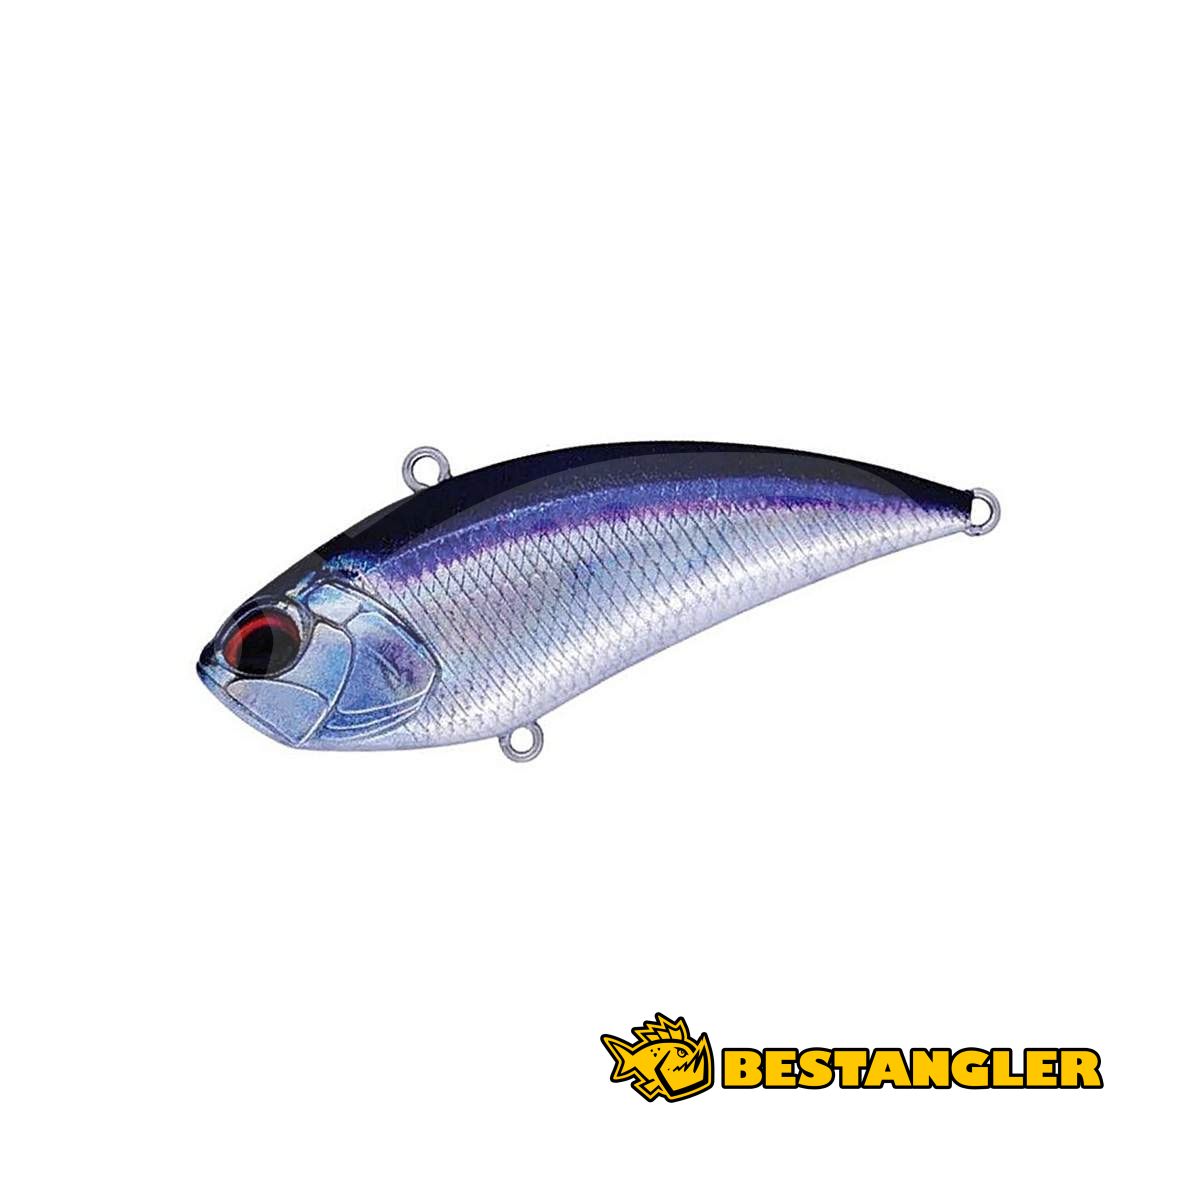 Duo Realis Vibration 68 G-FIX Ghost Gill